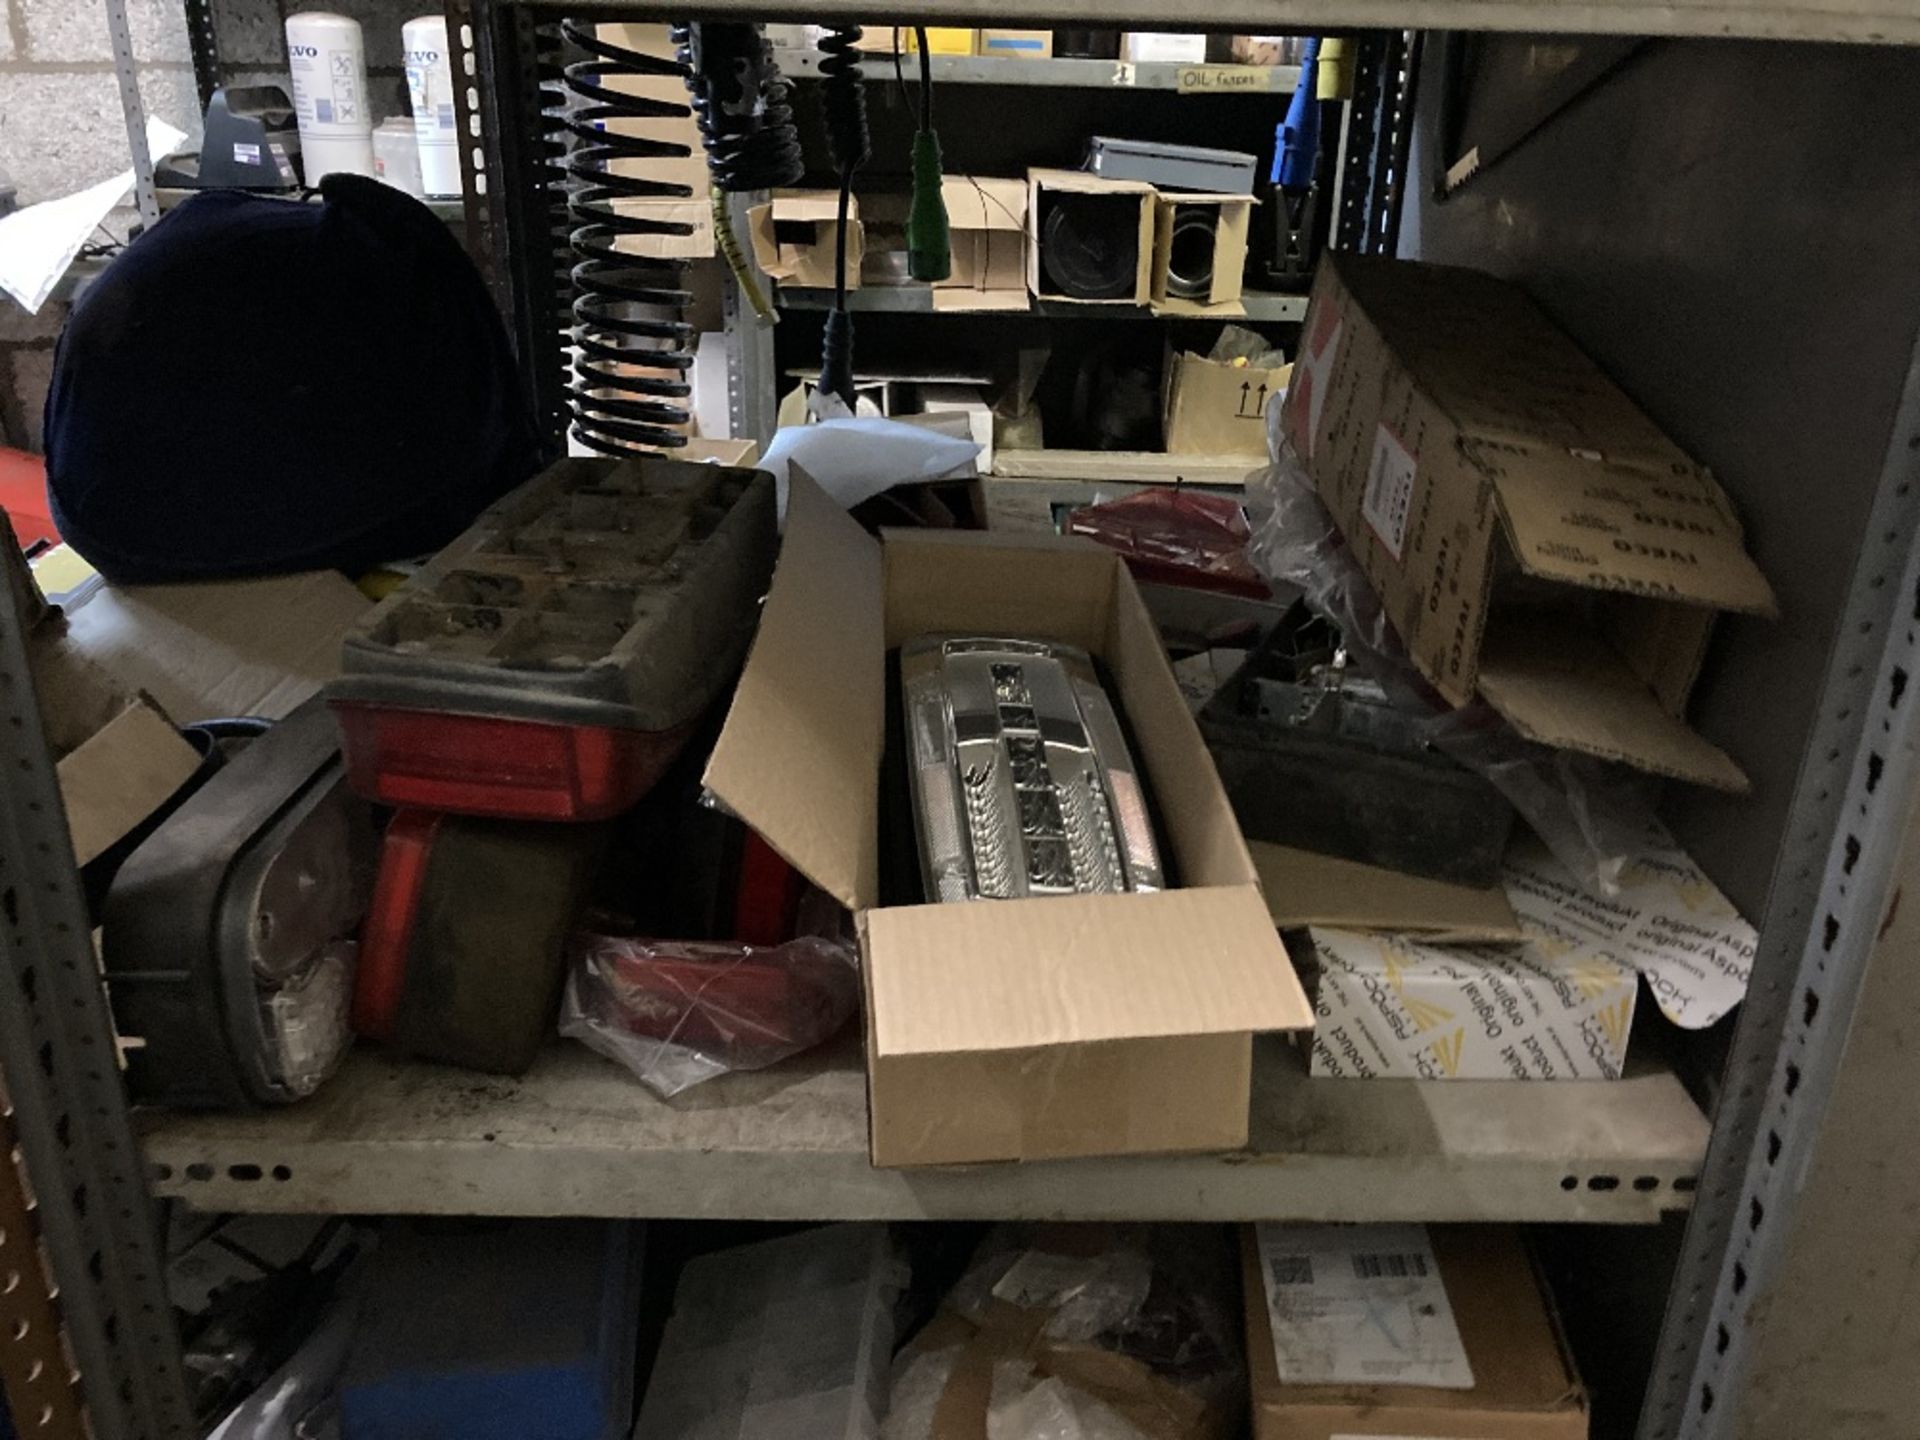 Content of Parts Room Containing Large Quantity of Various Parts & Components - Image 104 of 150